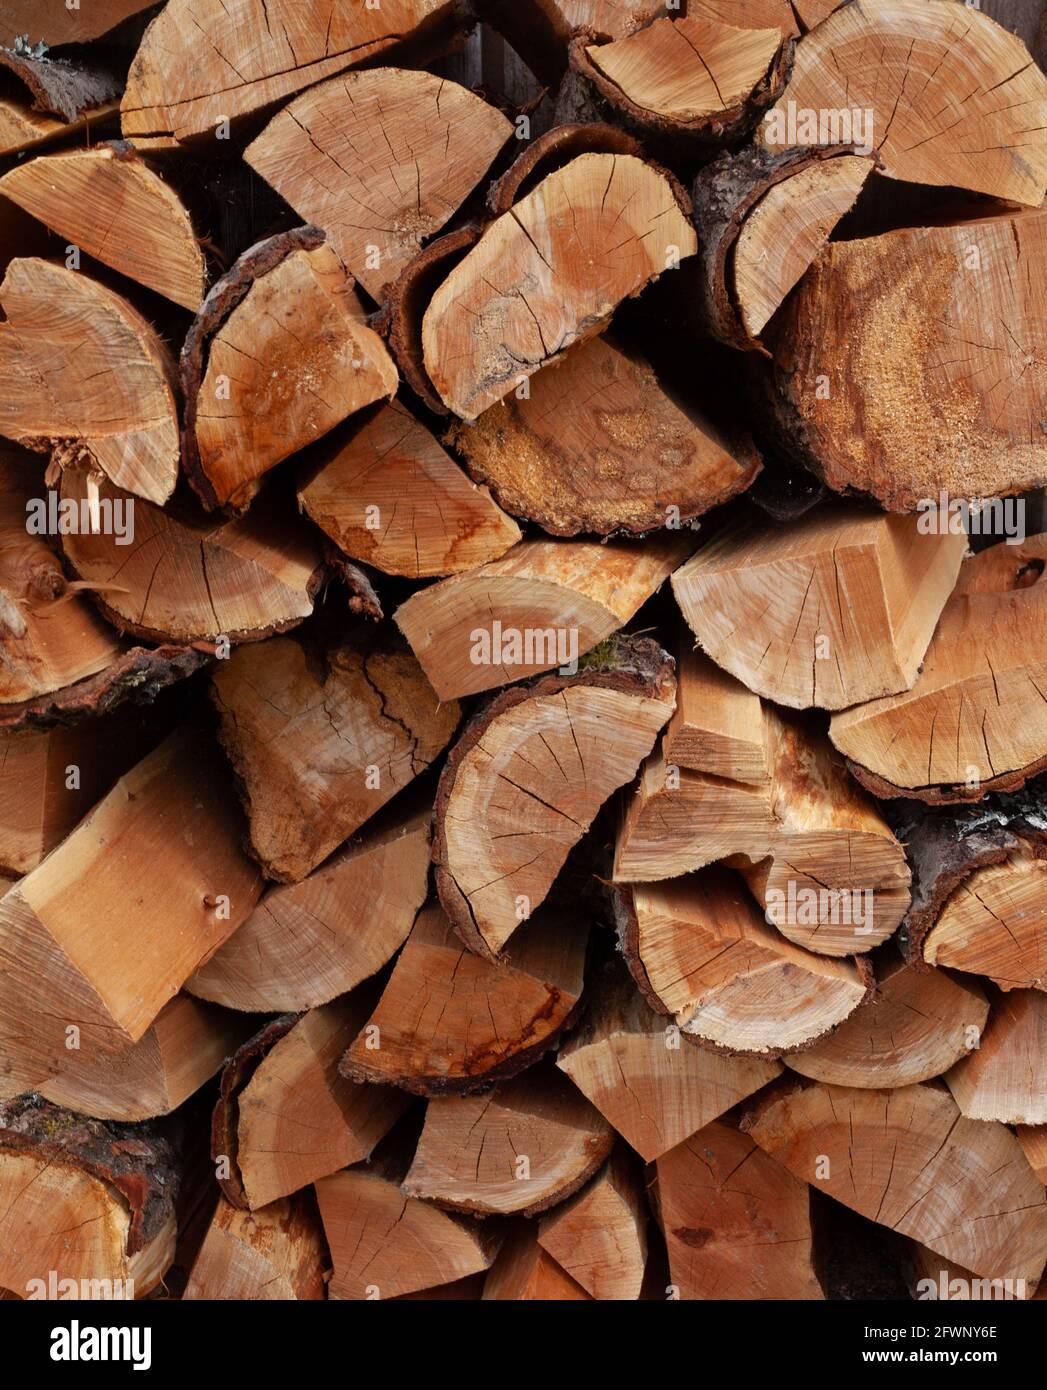 A pile of firewood, photograph of the edge of the beech logs. Stock Photo